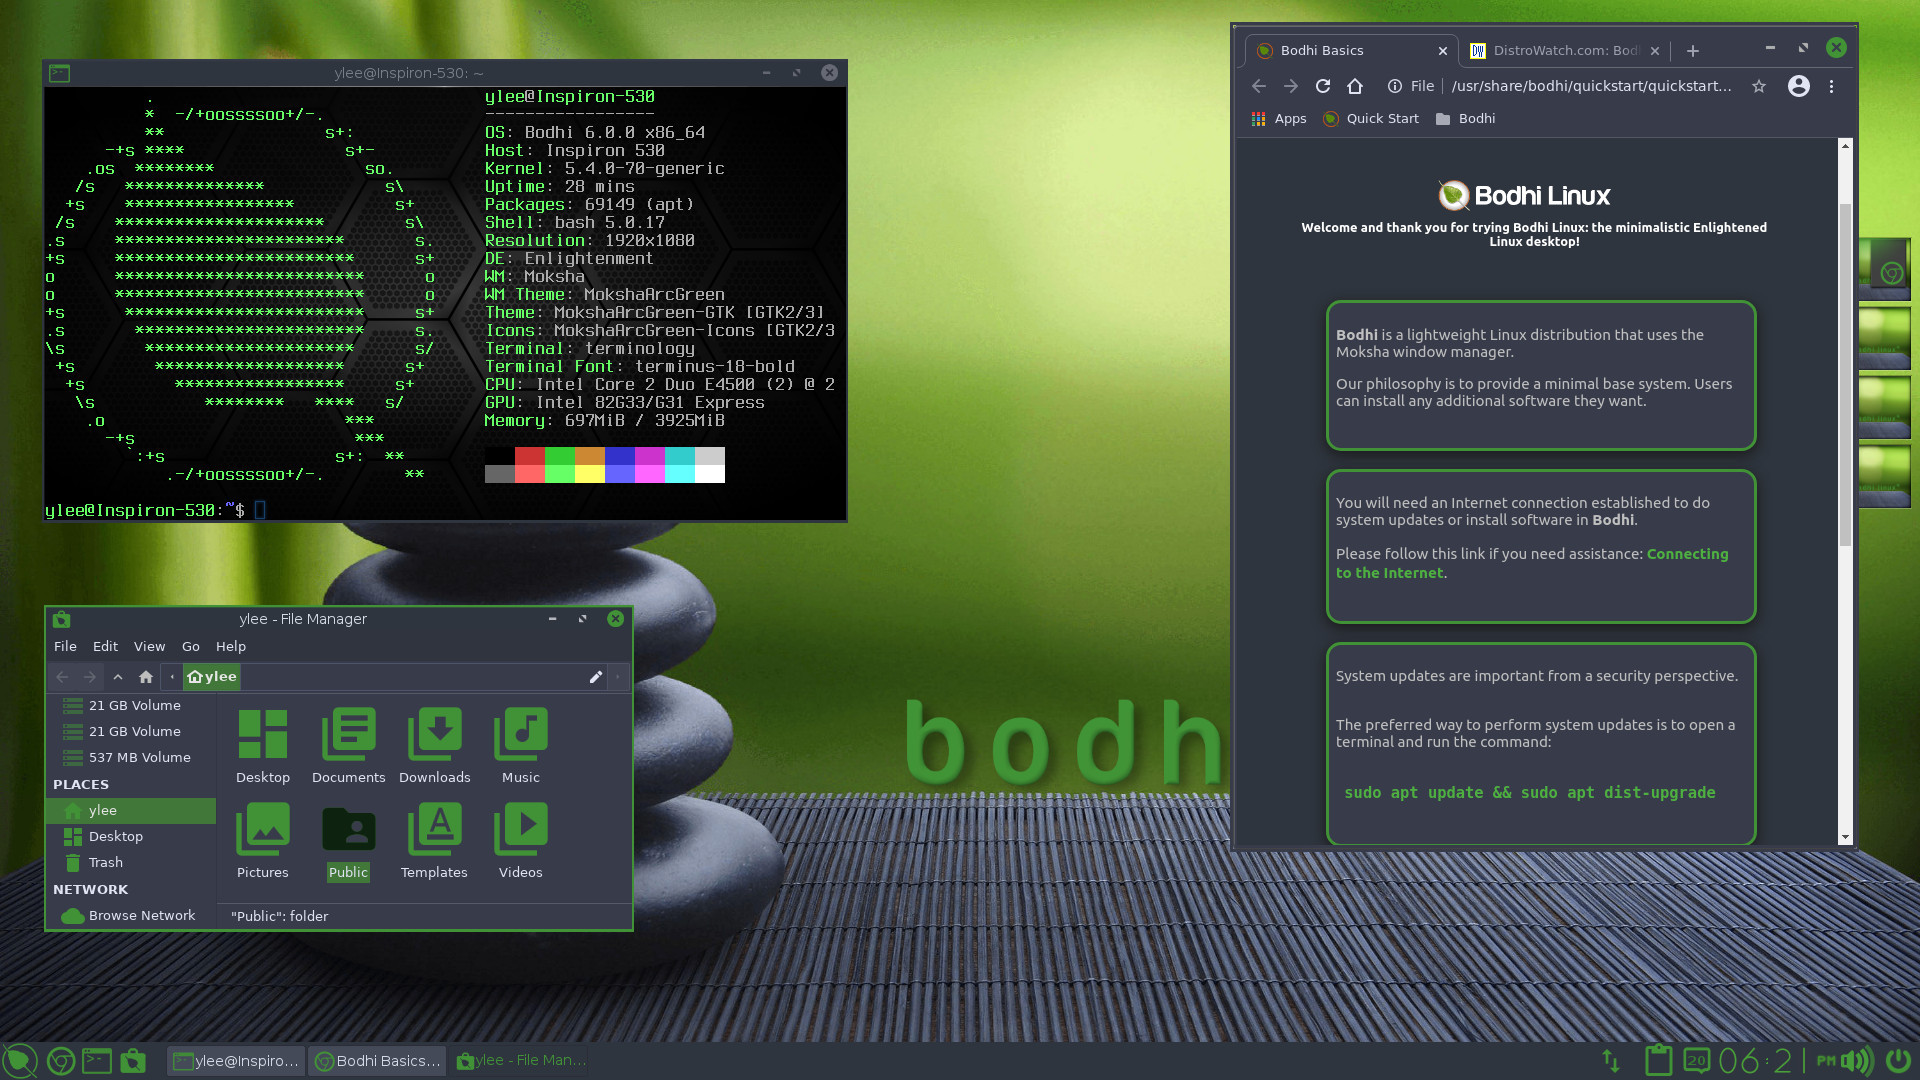 Bodhi: The Enlightened Linux Distribution